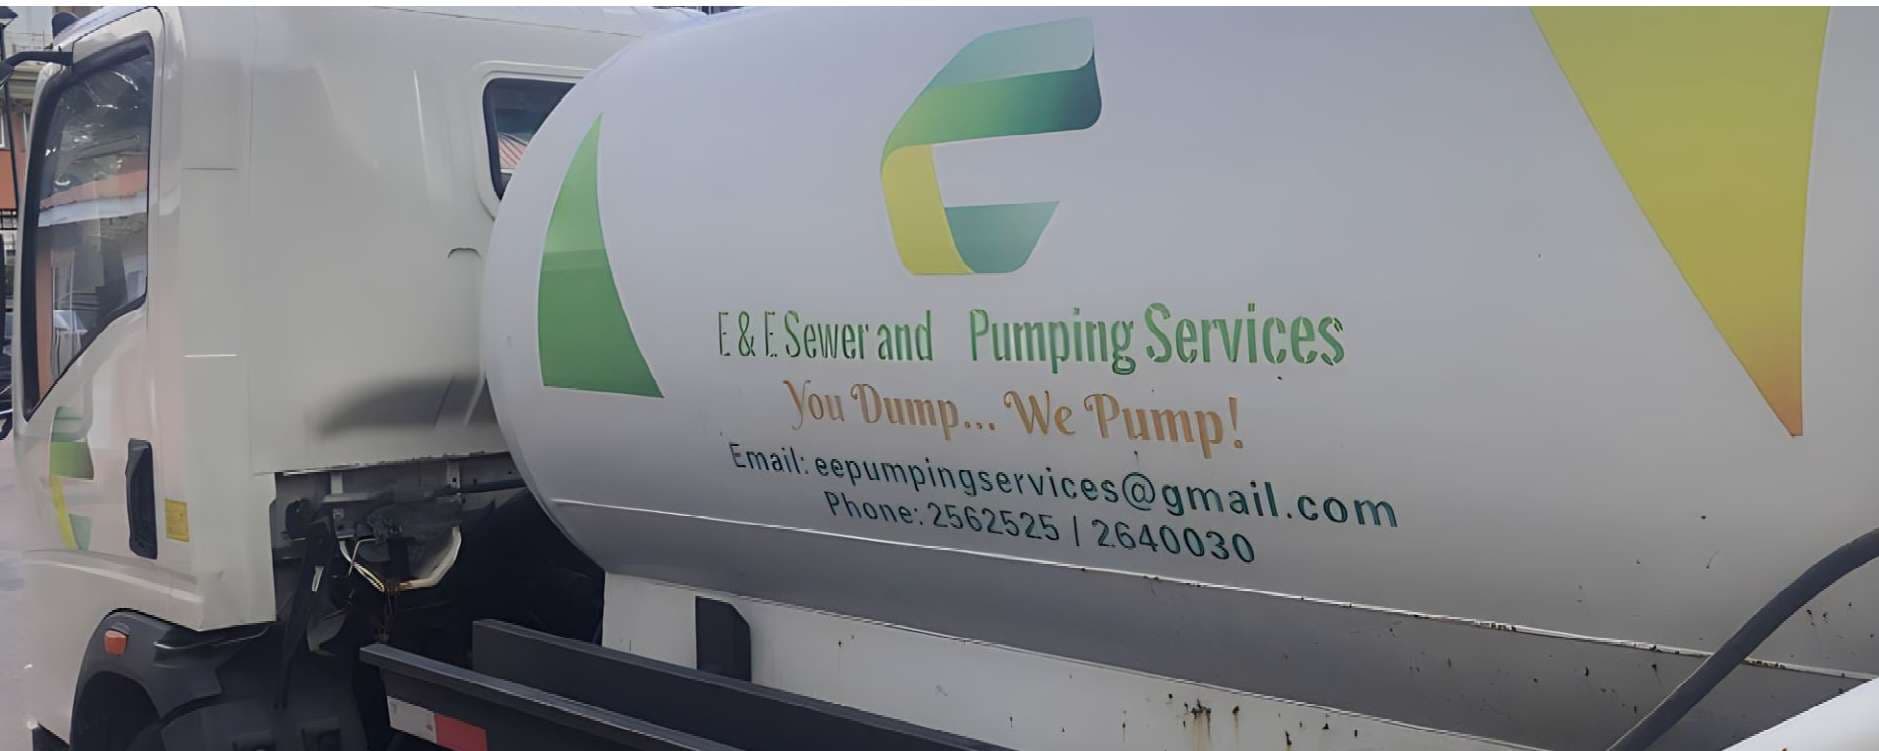 E&E Sewer and Pumping Services